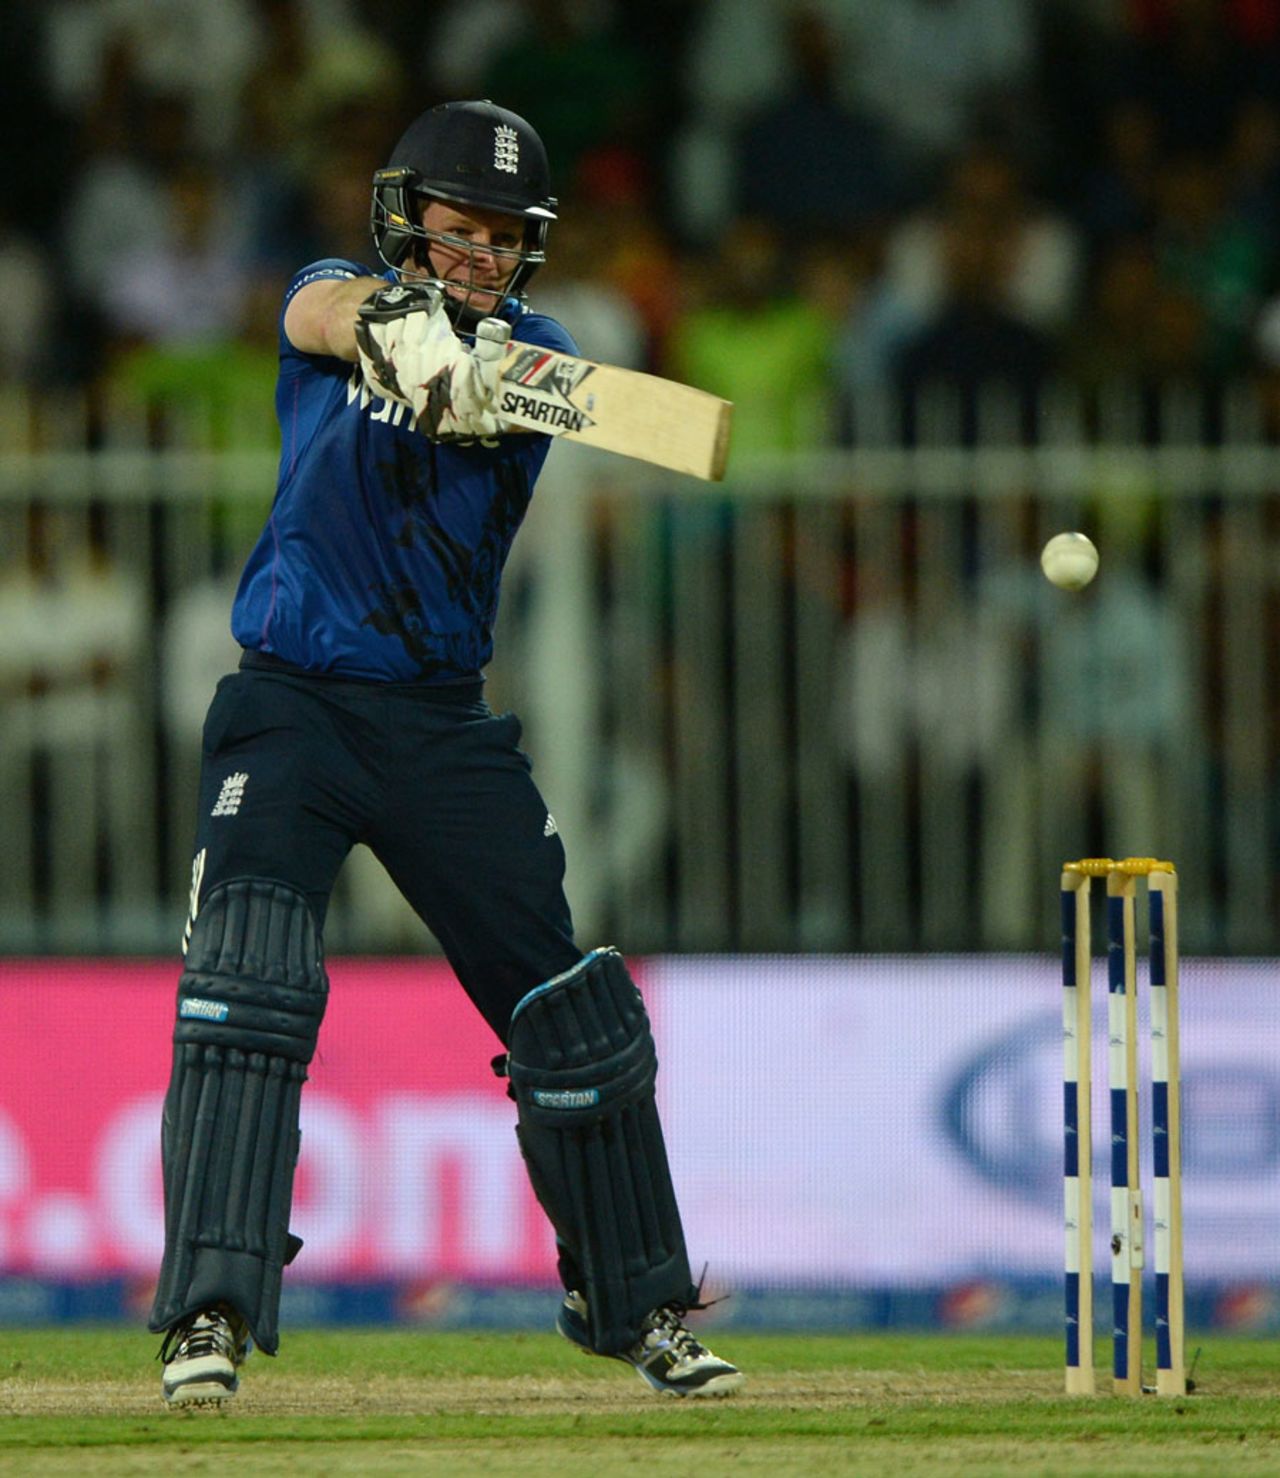 Eoin Morgan helped England recover from 27 for 2, Pakistan v England, 3rd ODI, Sharjah, November 17, 2015